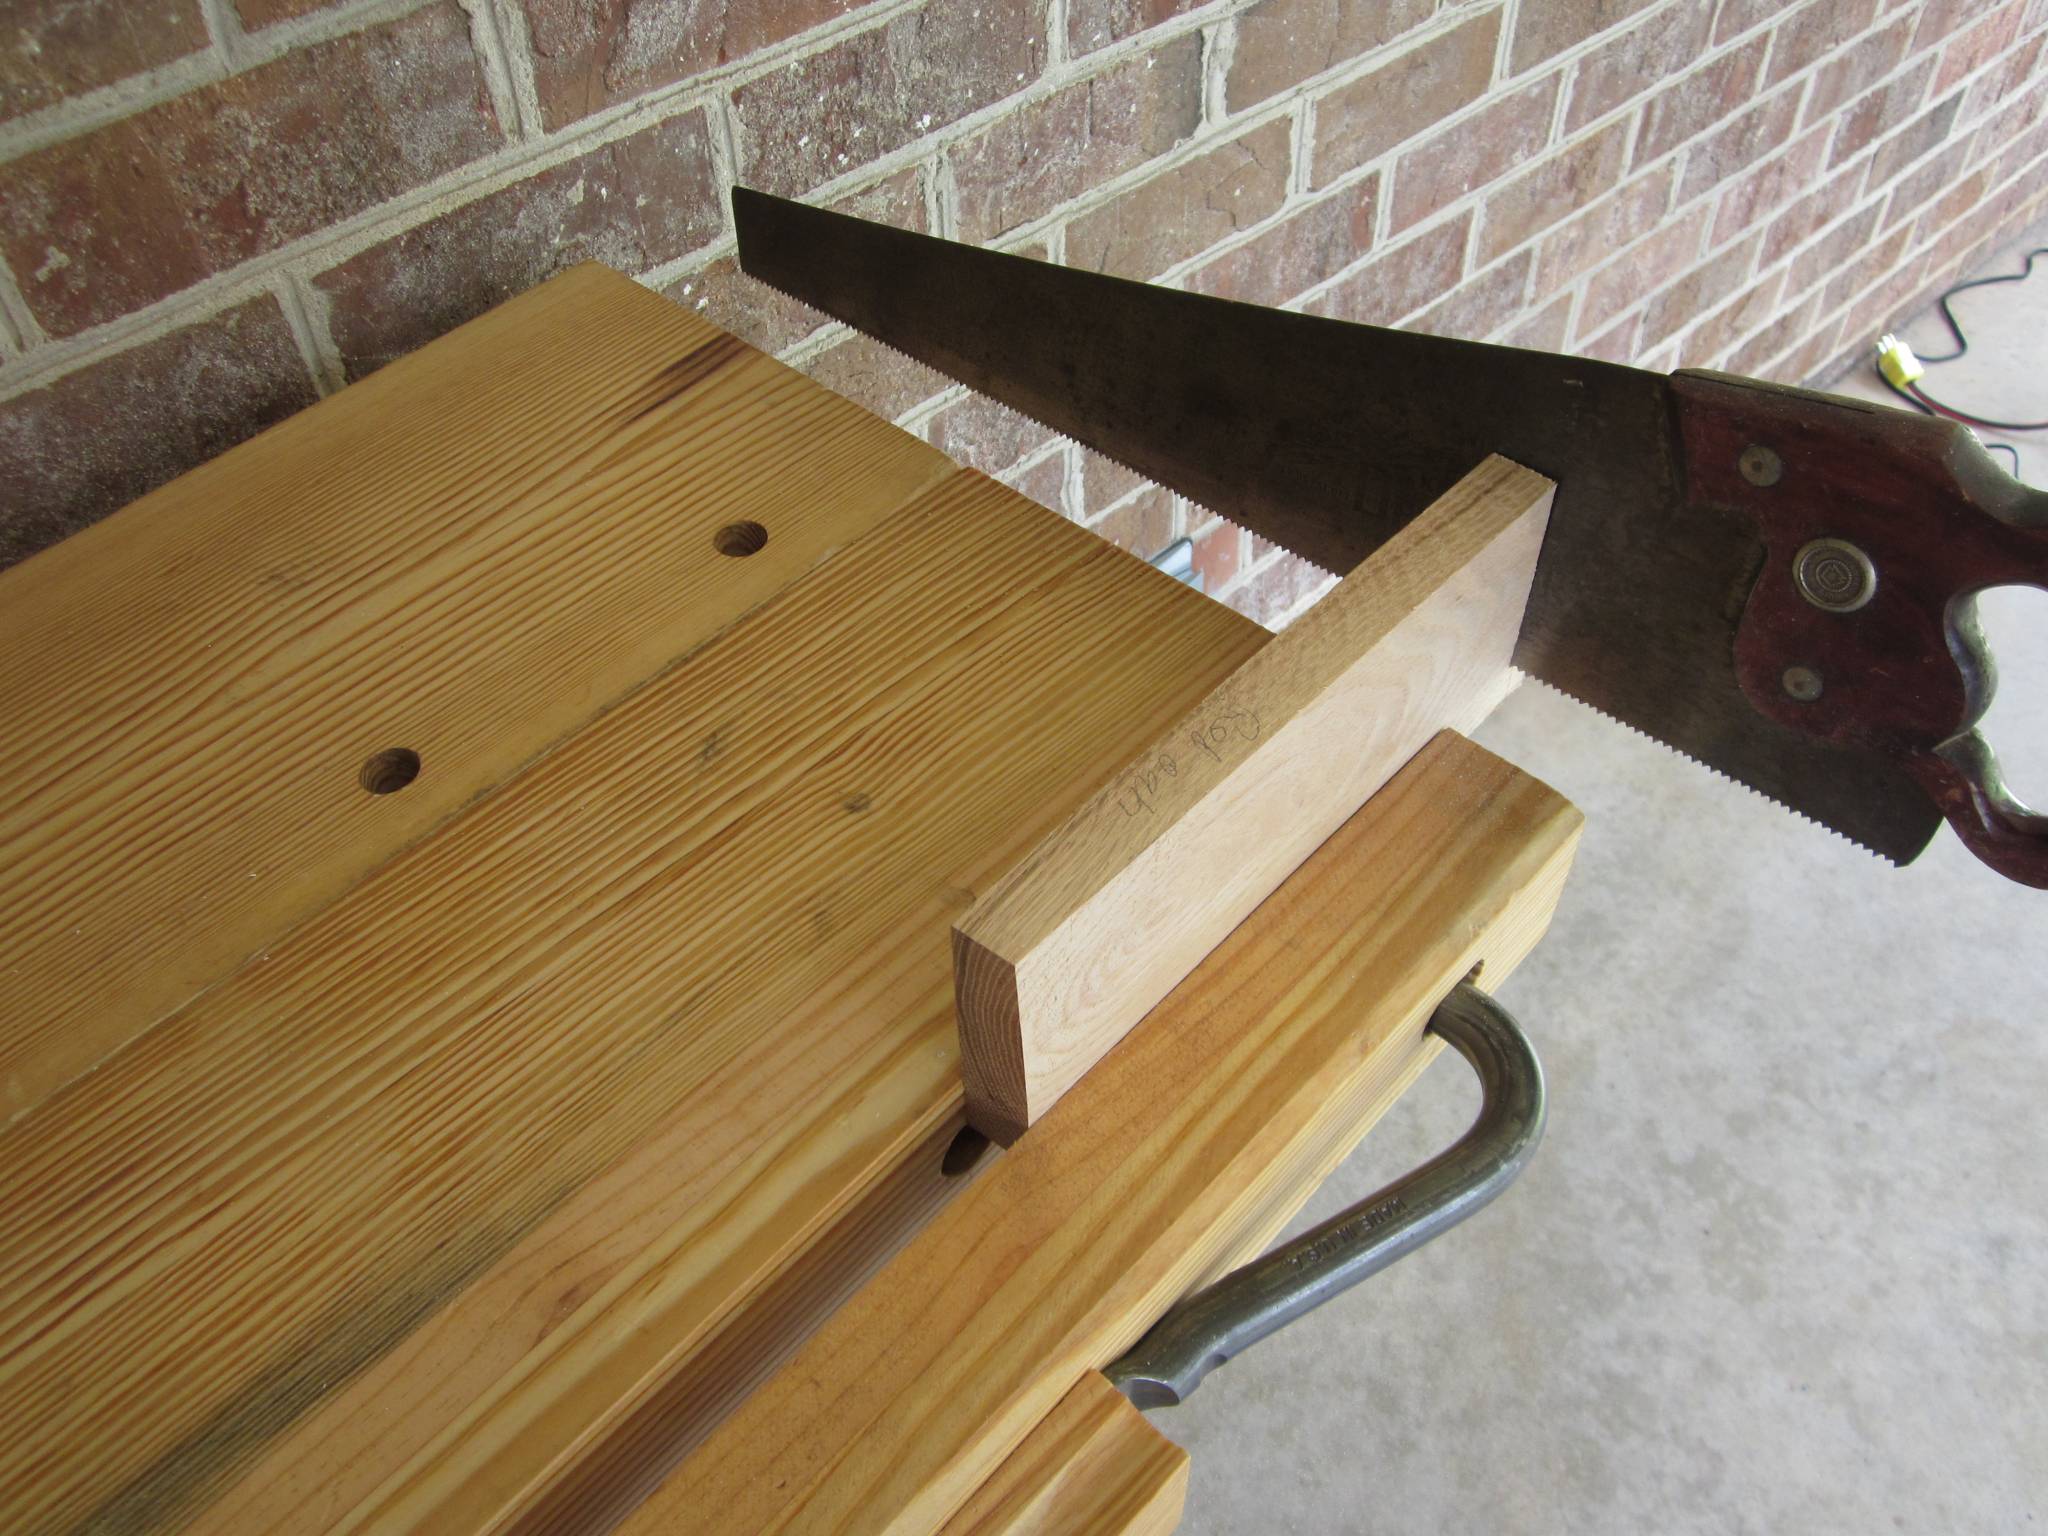 Portable woodworking bench